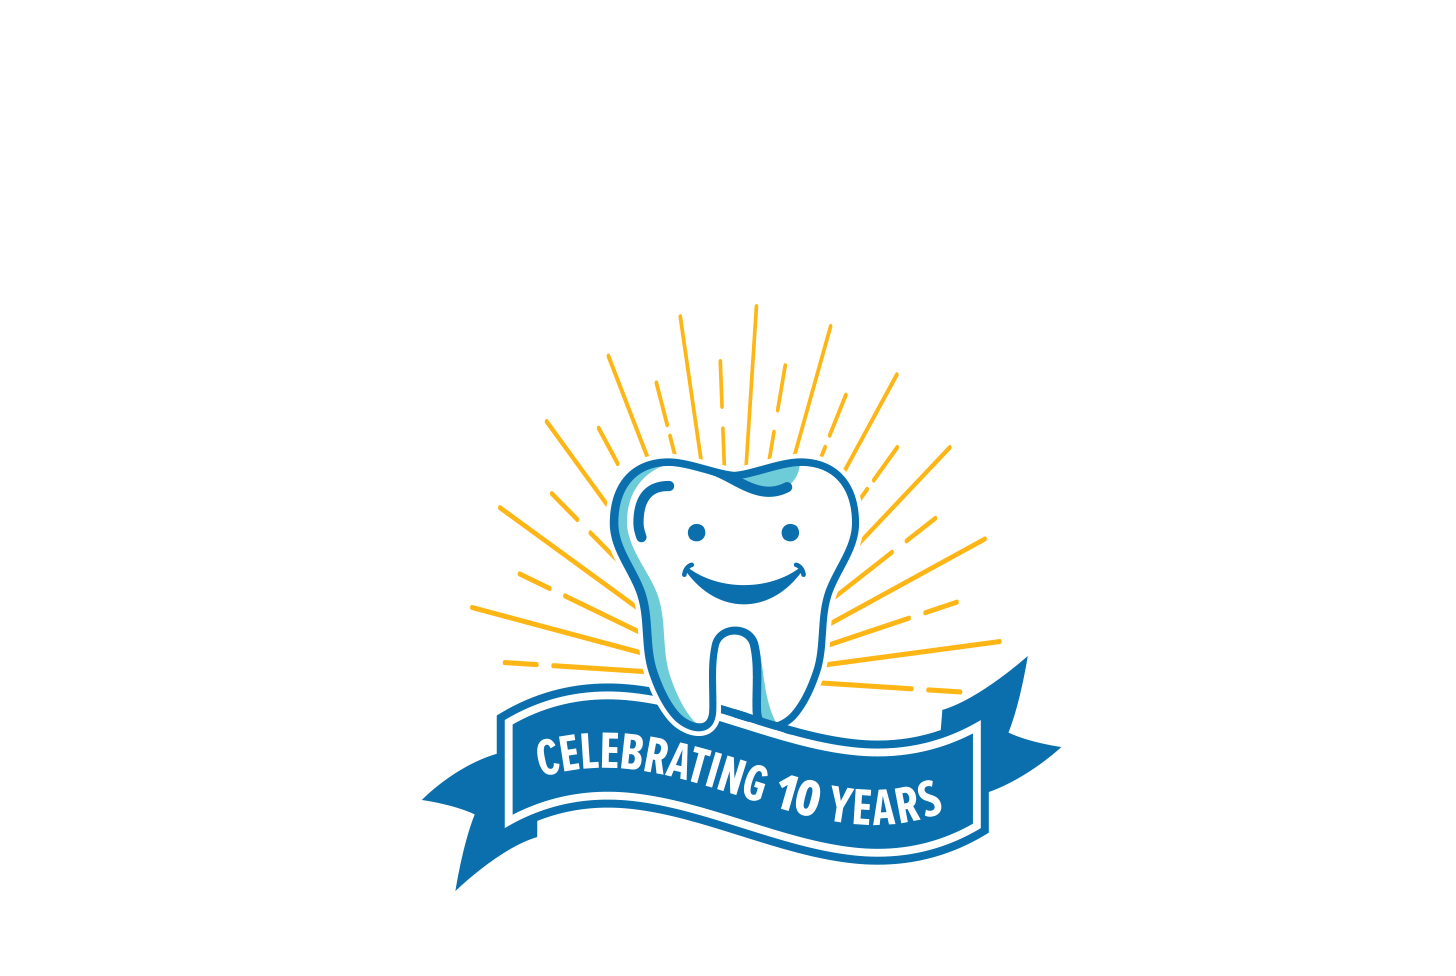 Graphic image of a shining, smiling tooth above a banner that reads "Celebrating 10 years"